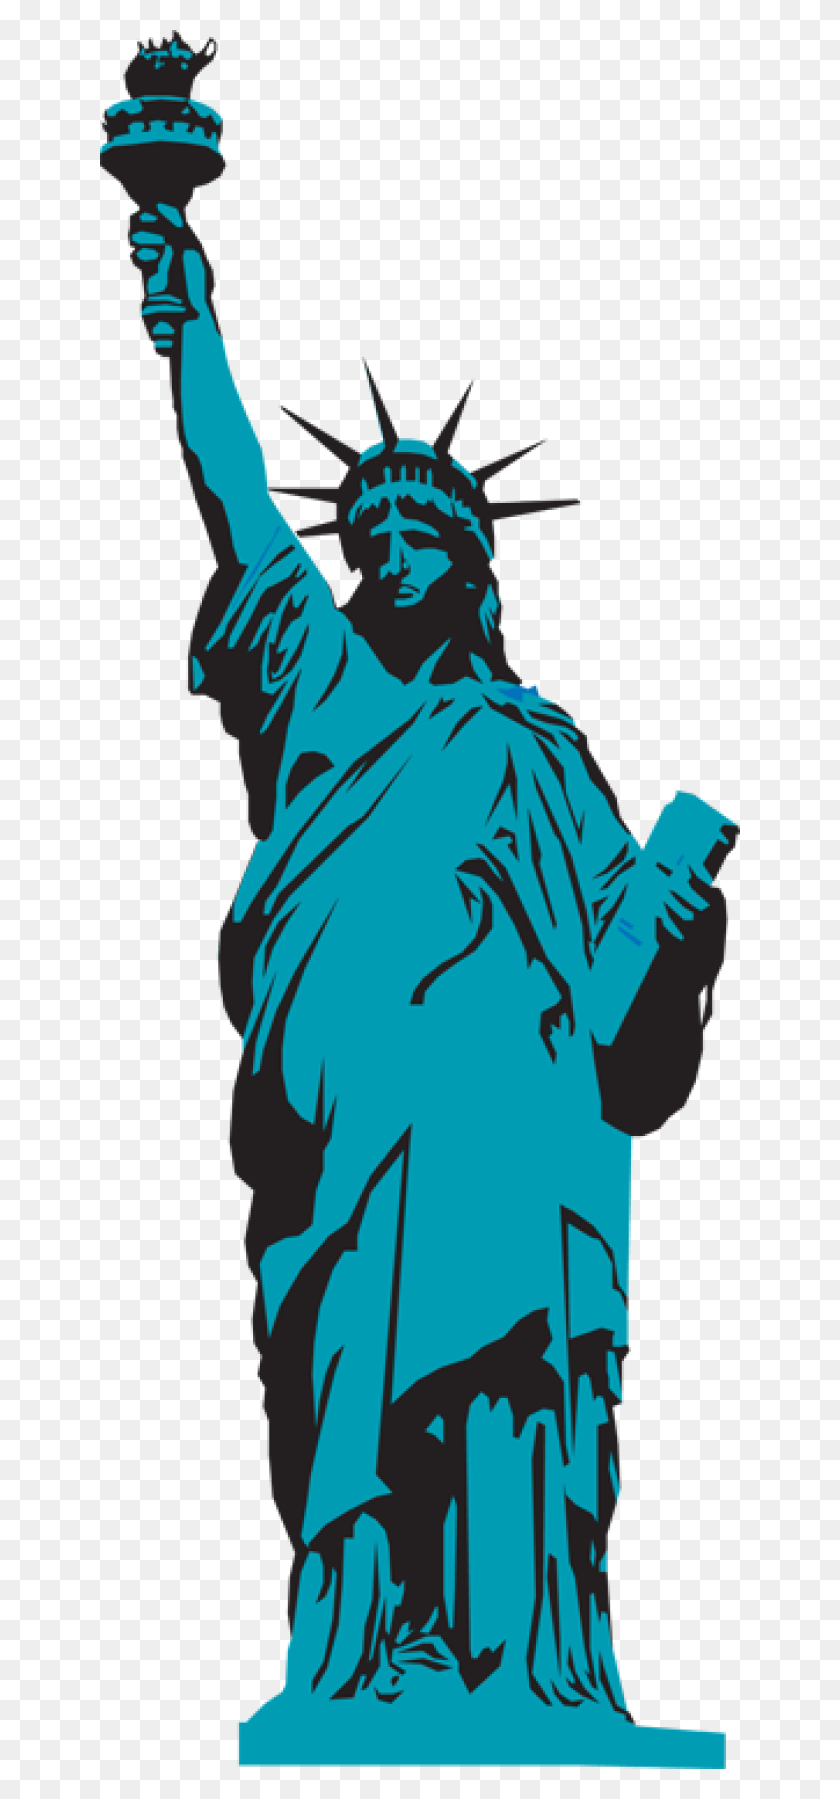 640x1739 Clipart Statue Of Liberty Look At Statue Of Liberty Clip Art - Heart Carved In Tree Clipart